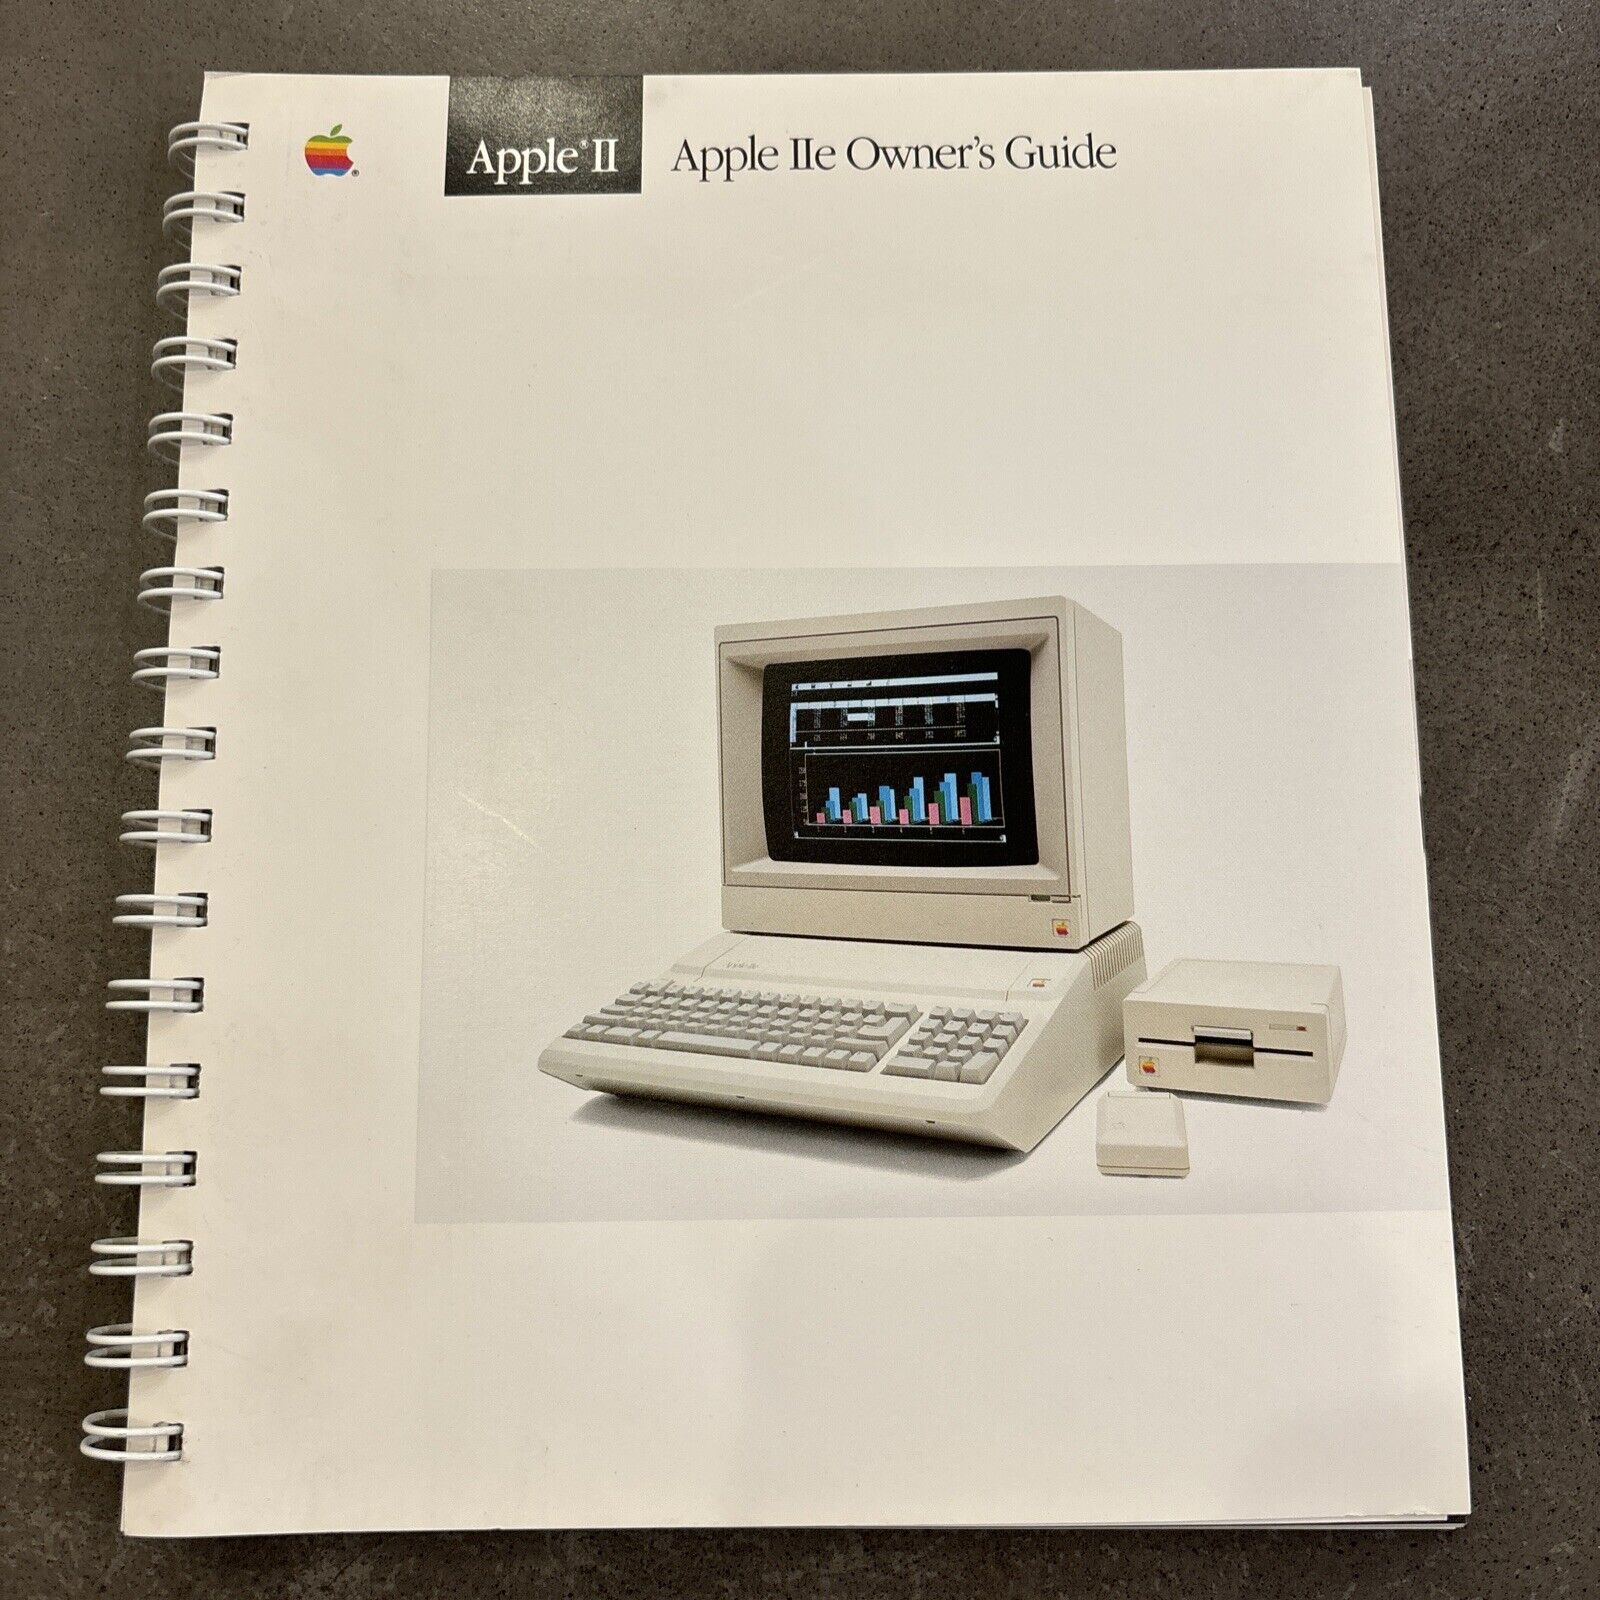 Apple IIe Owner’s Guide 1986 - Brand New - 168 Pages - 030-1356-B